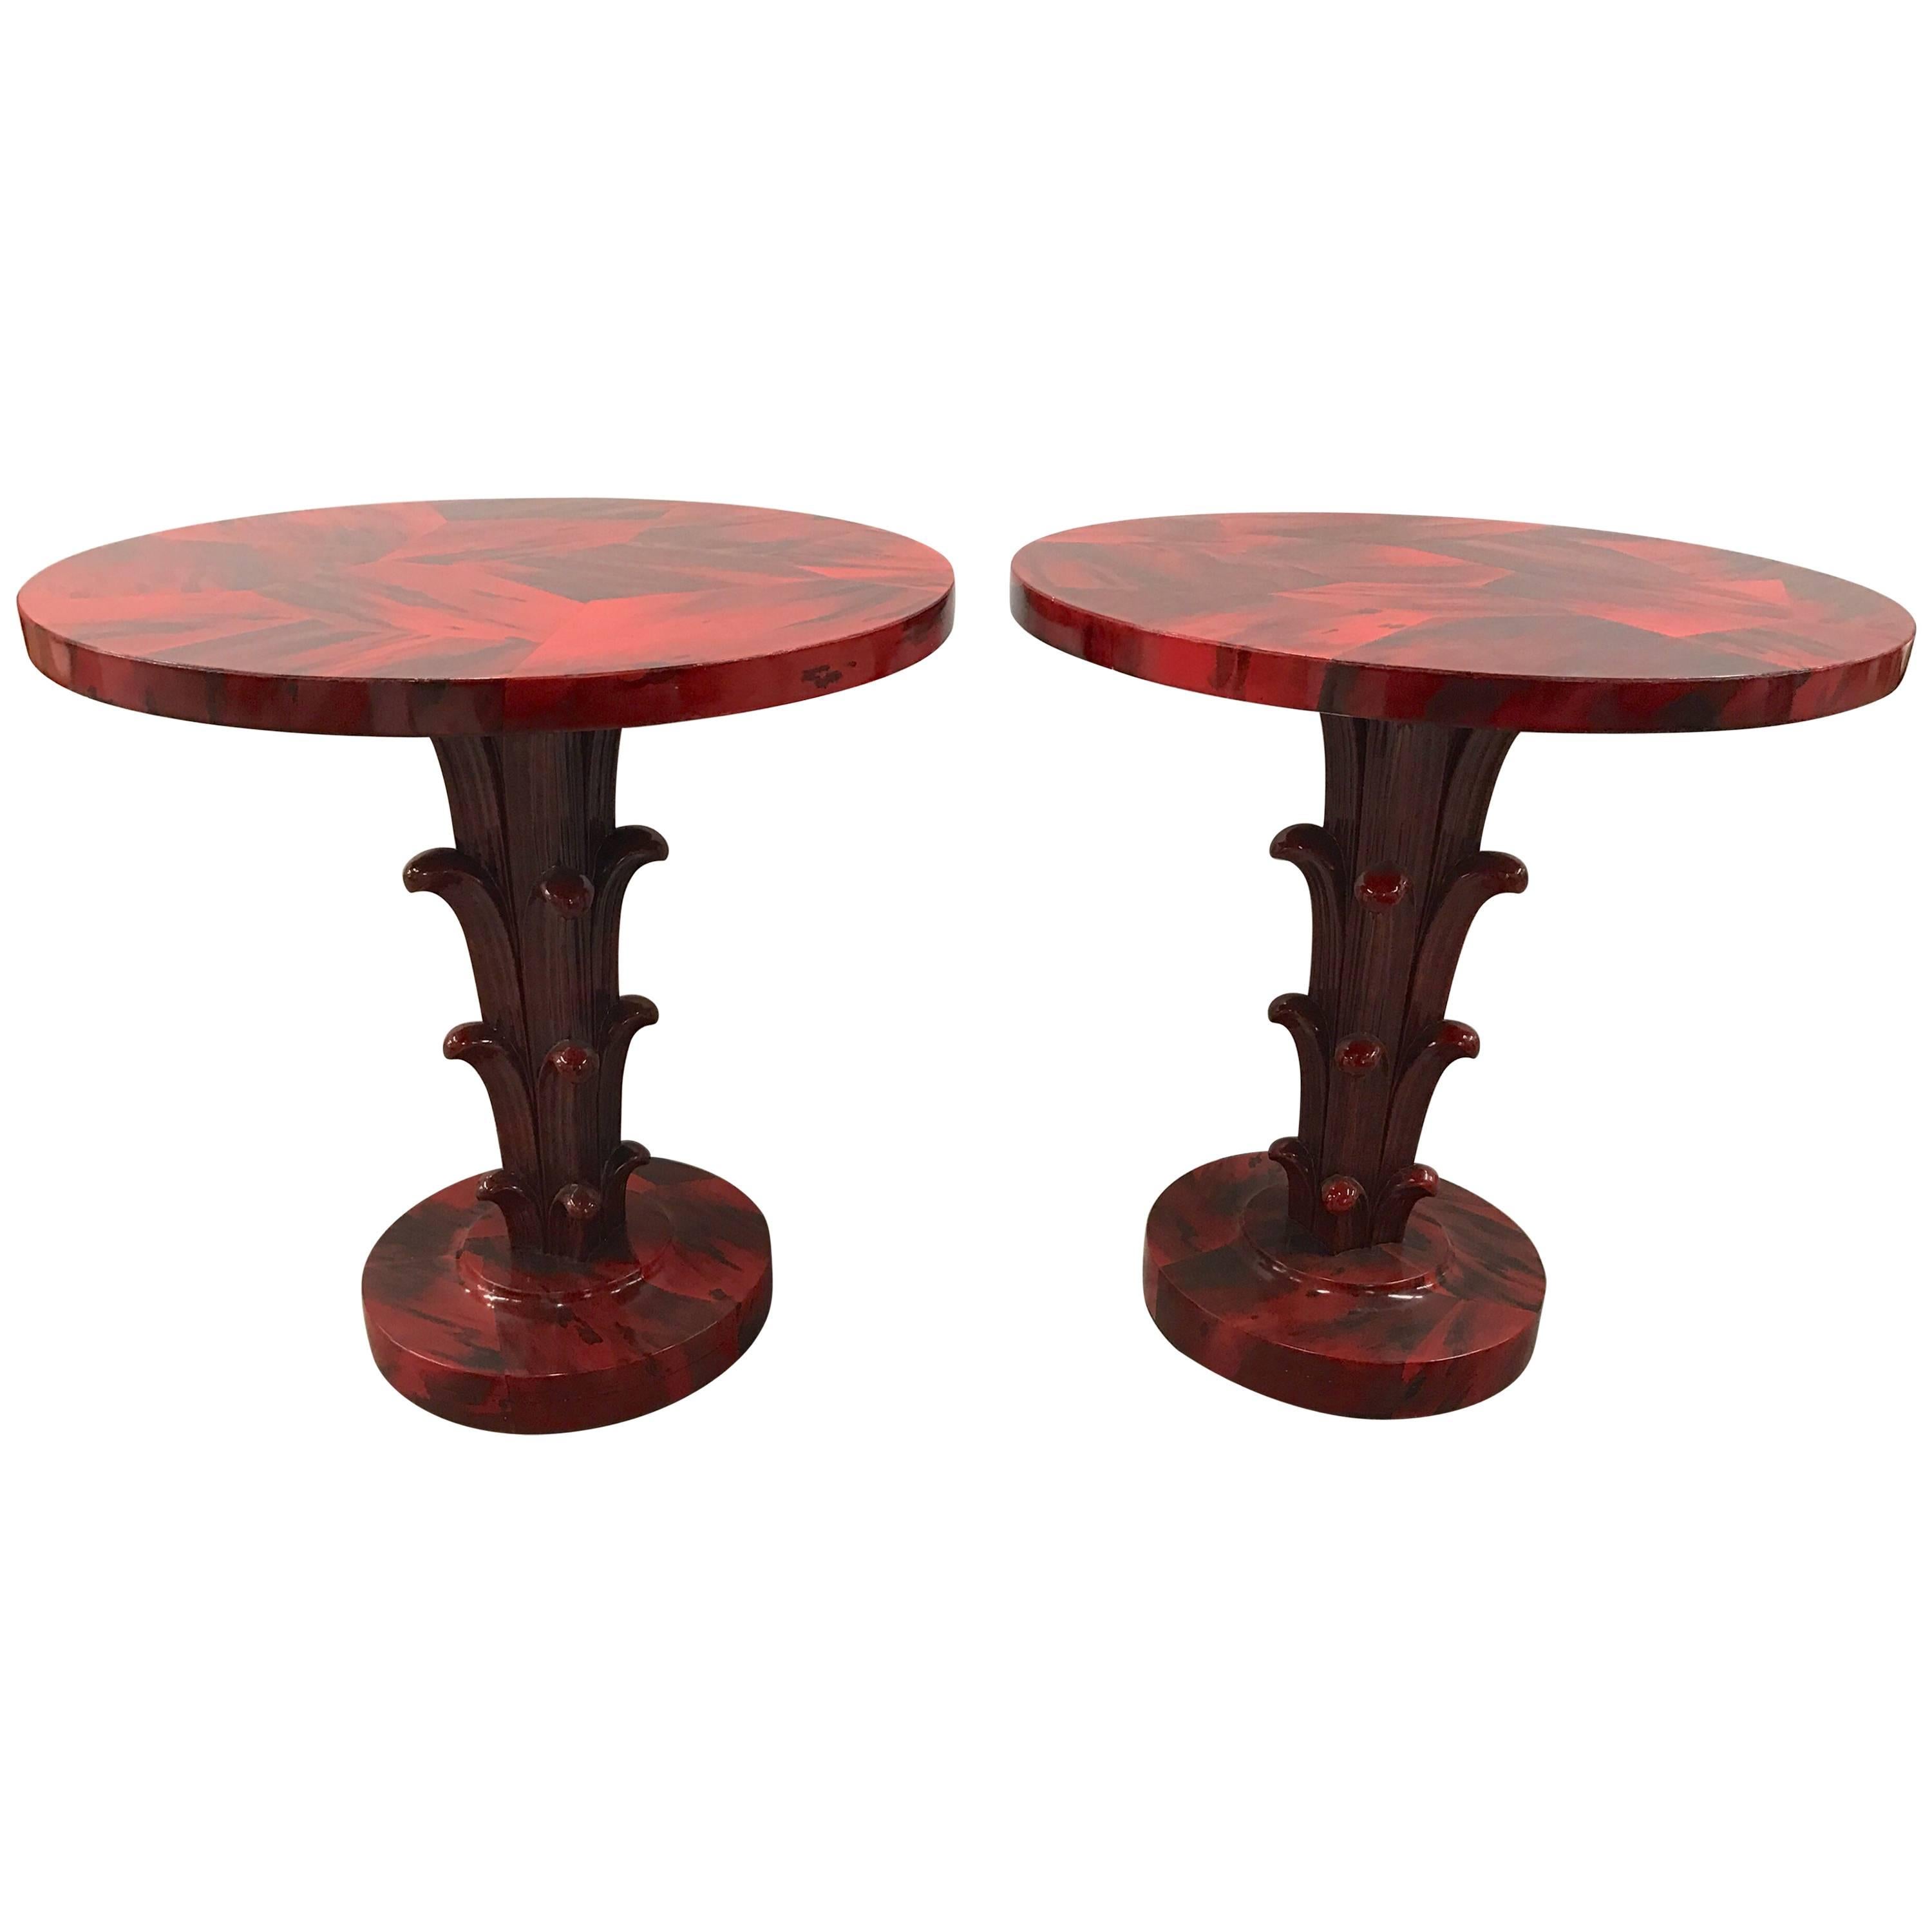 Serge Roche Style Art Deco Red Laquer Palm Tree Tables